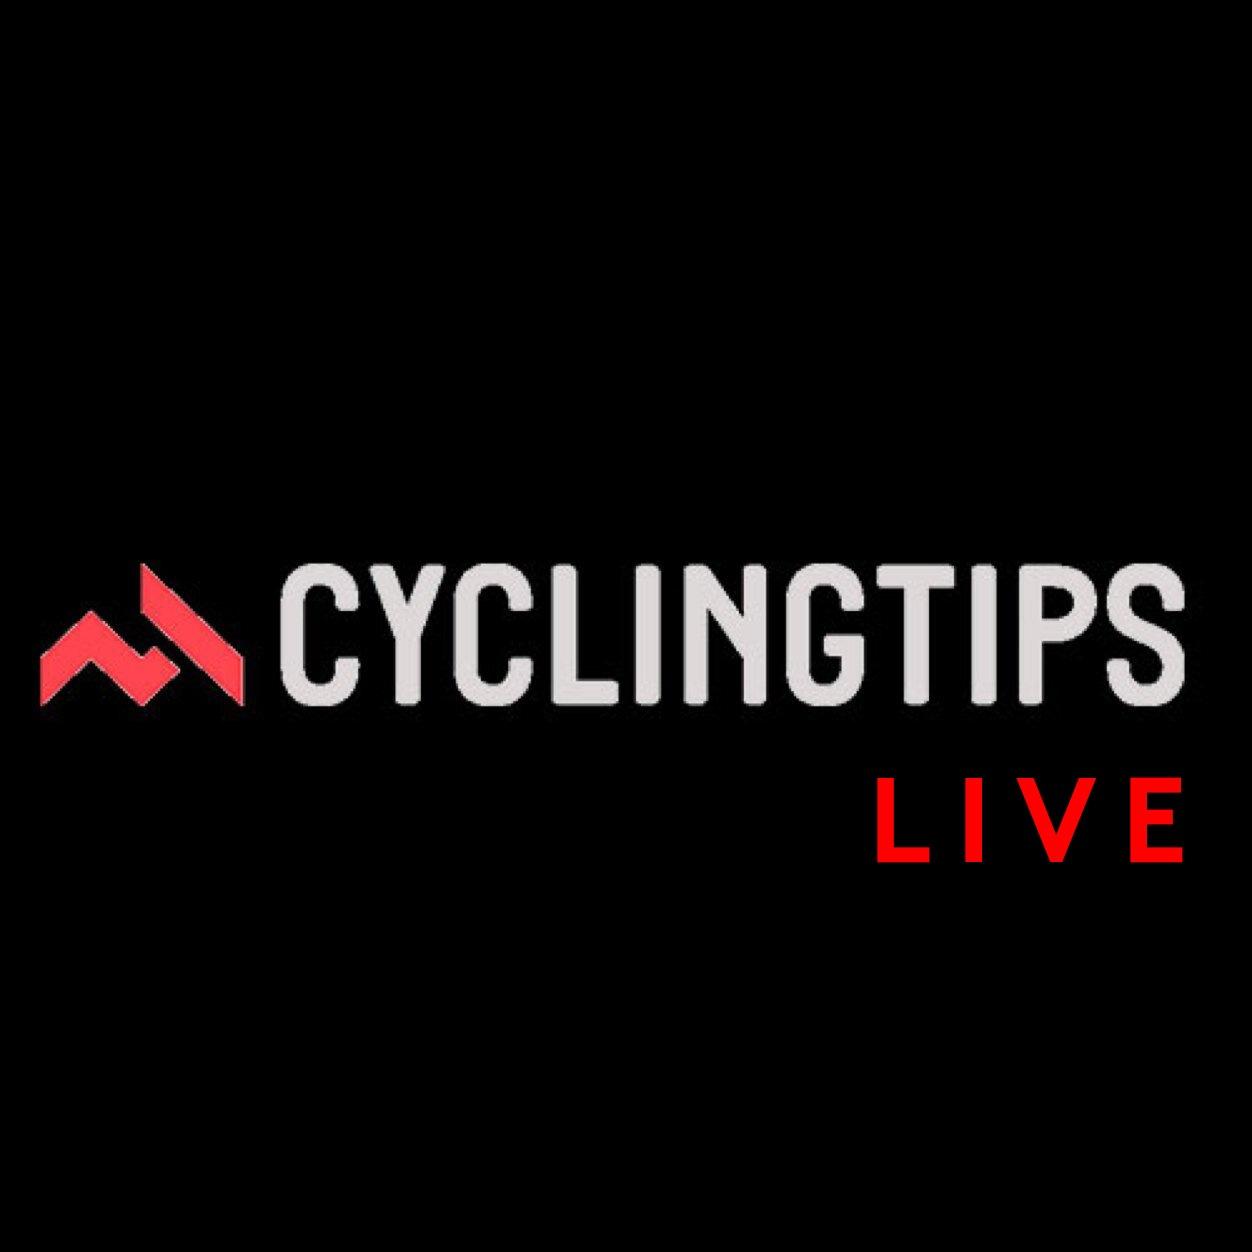 Live race updates brought to you by @CyclingTips